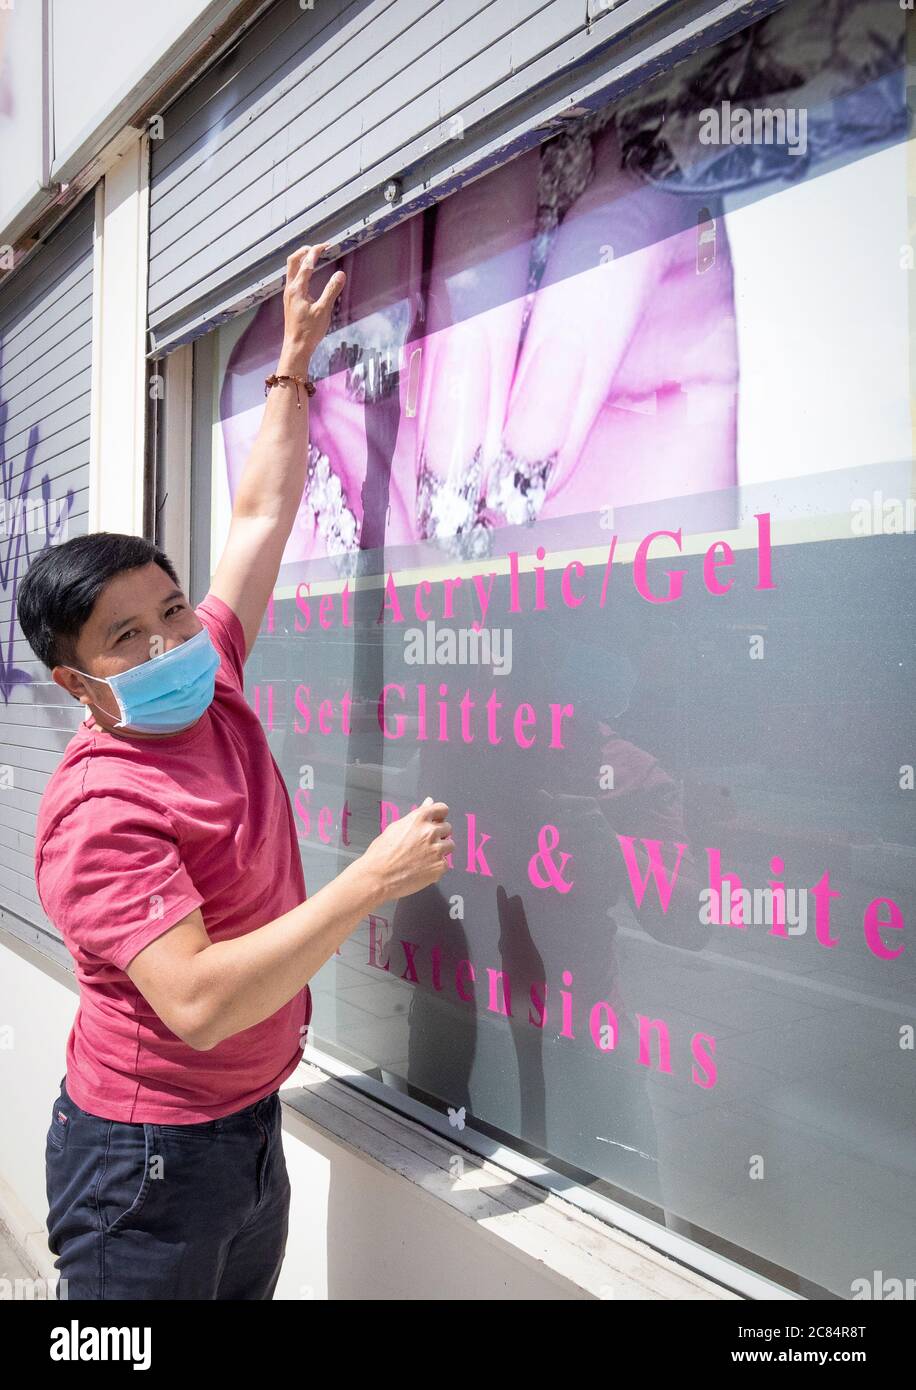 Bau Van Pham, manager of Nails and Spa on Croall Place, Edinburgh, cleans and makes preparations before the salon reopens on Wednesday July 22 as Scotland prepares for the lifting of further coronavirus lockdown restrictions. Stock Photo